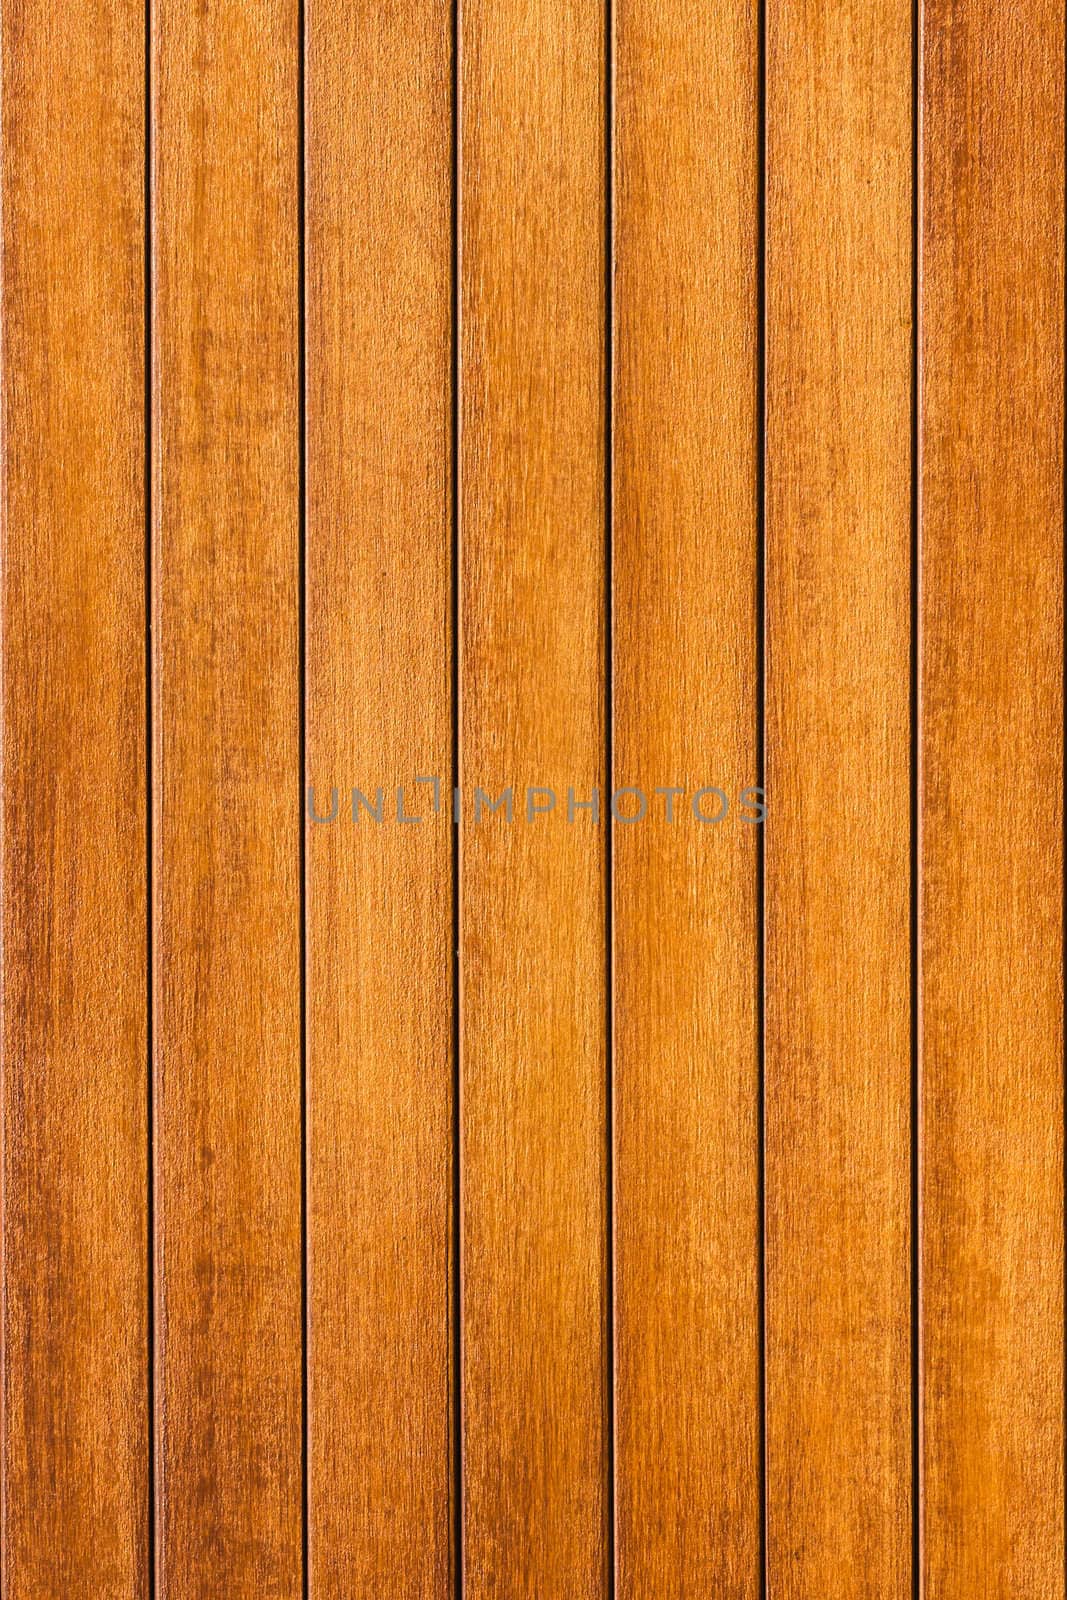 Brown Wood Wall in  Vertical Pattern,  Natural Color. by punpleng